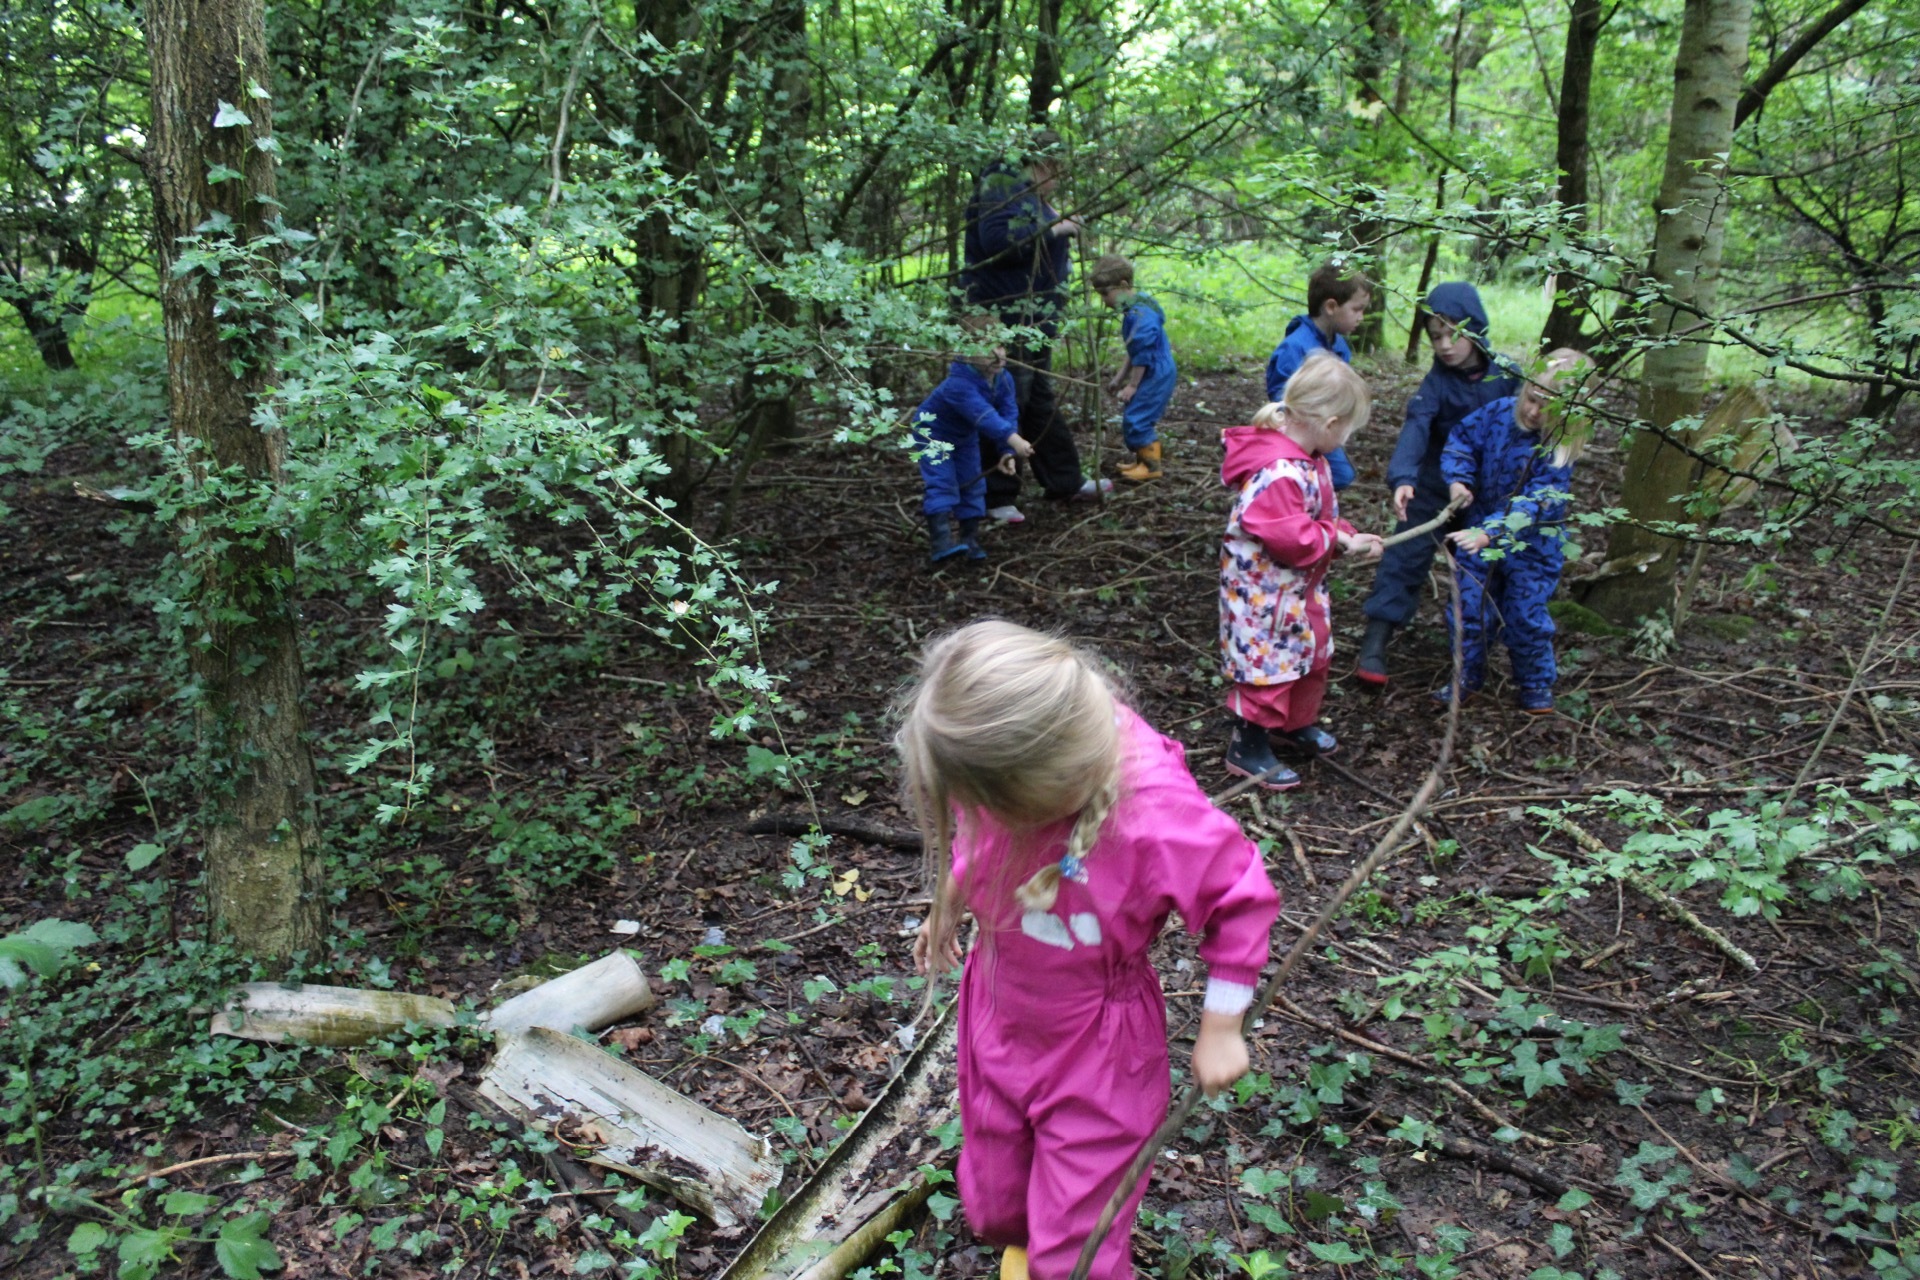 Forest School 1